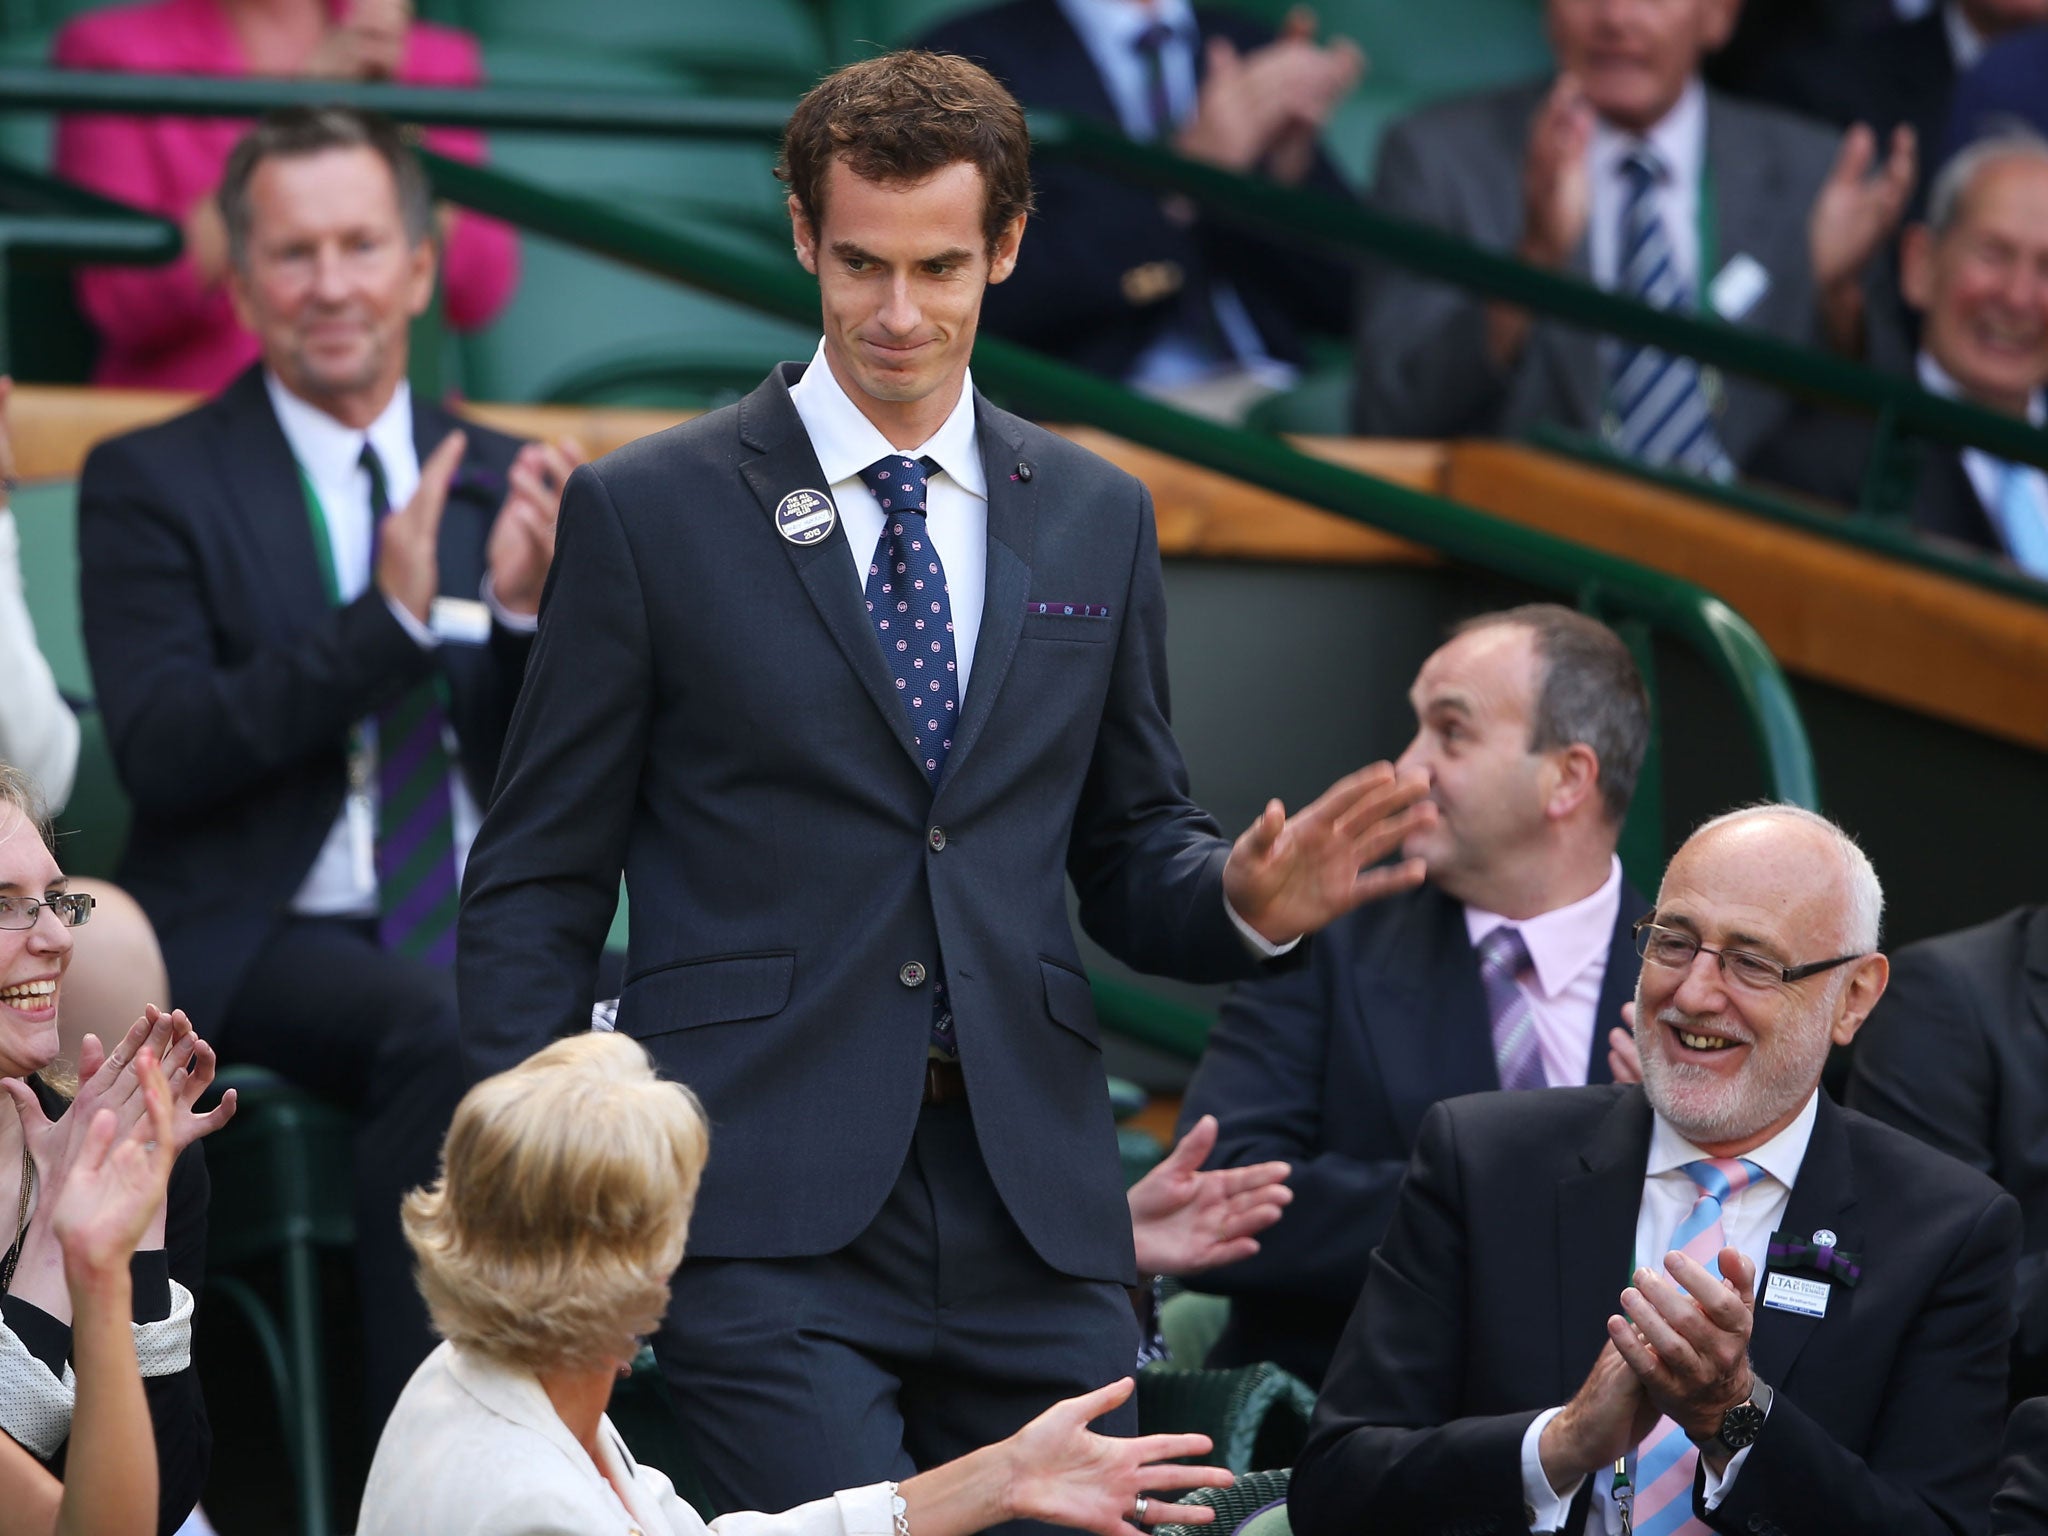 The in crowd: Andy Murray takes his seat in the Royal Box after being introduced with fellow Olympic gold medalists